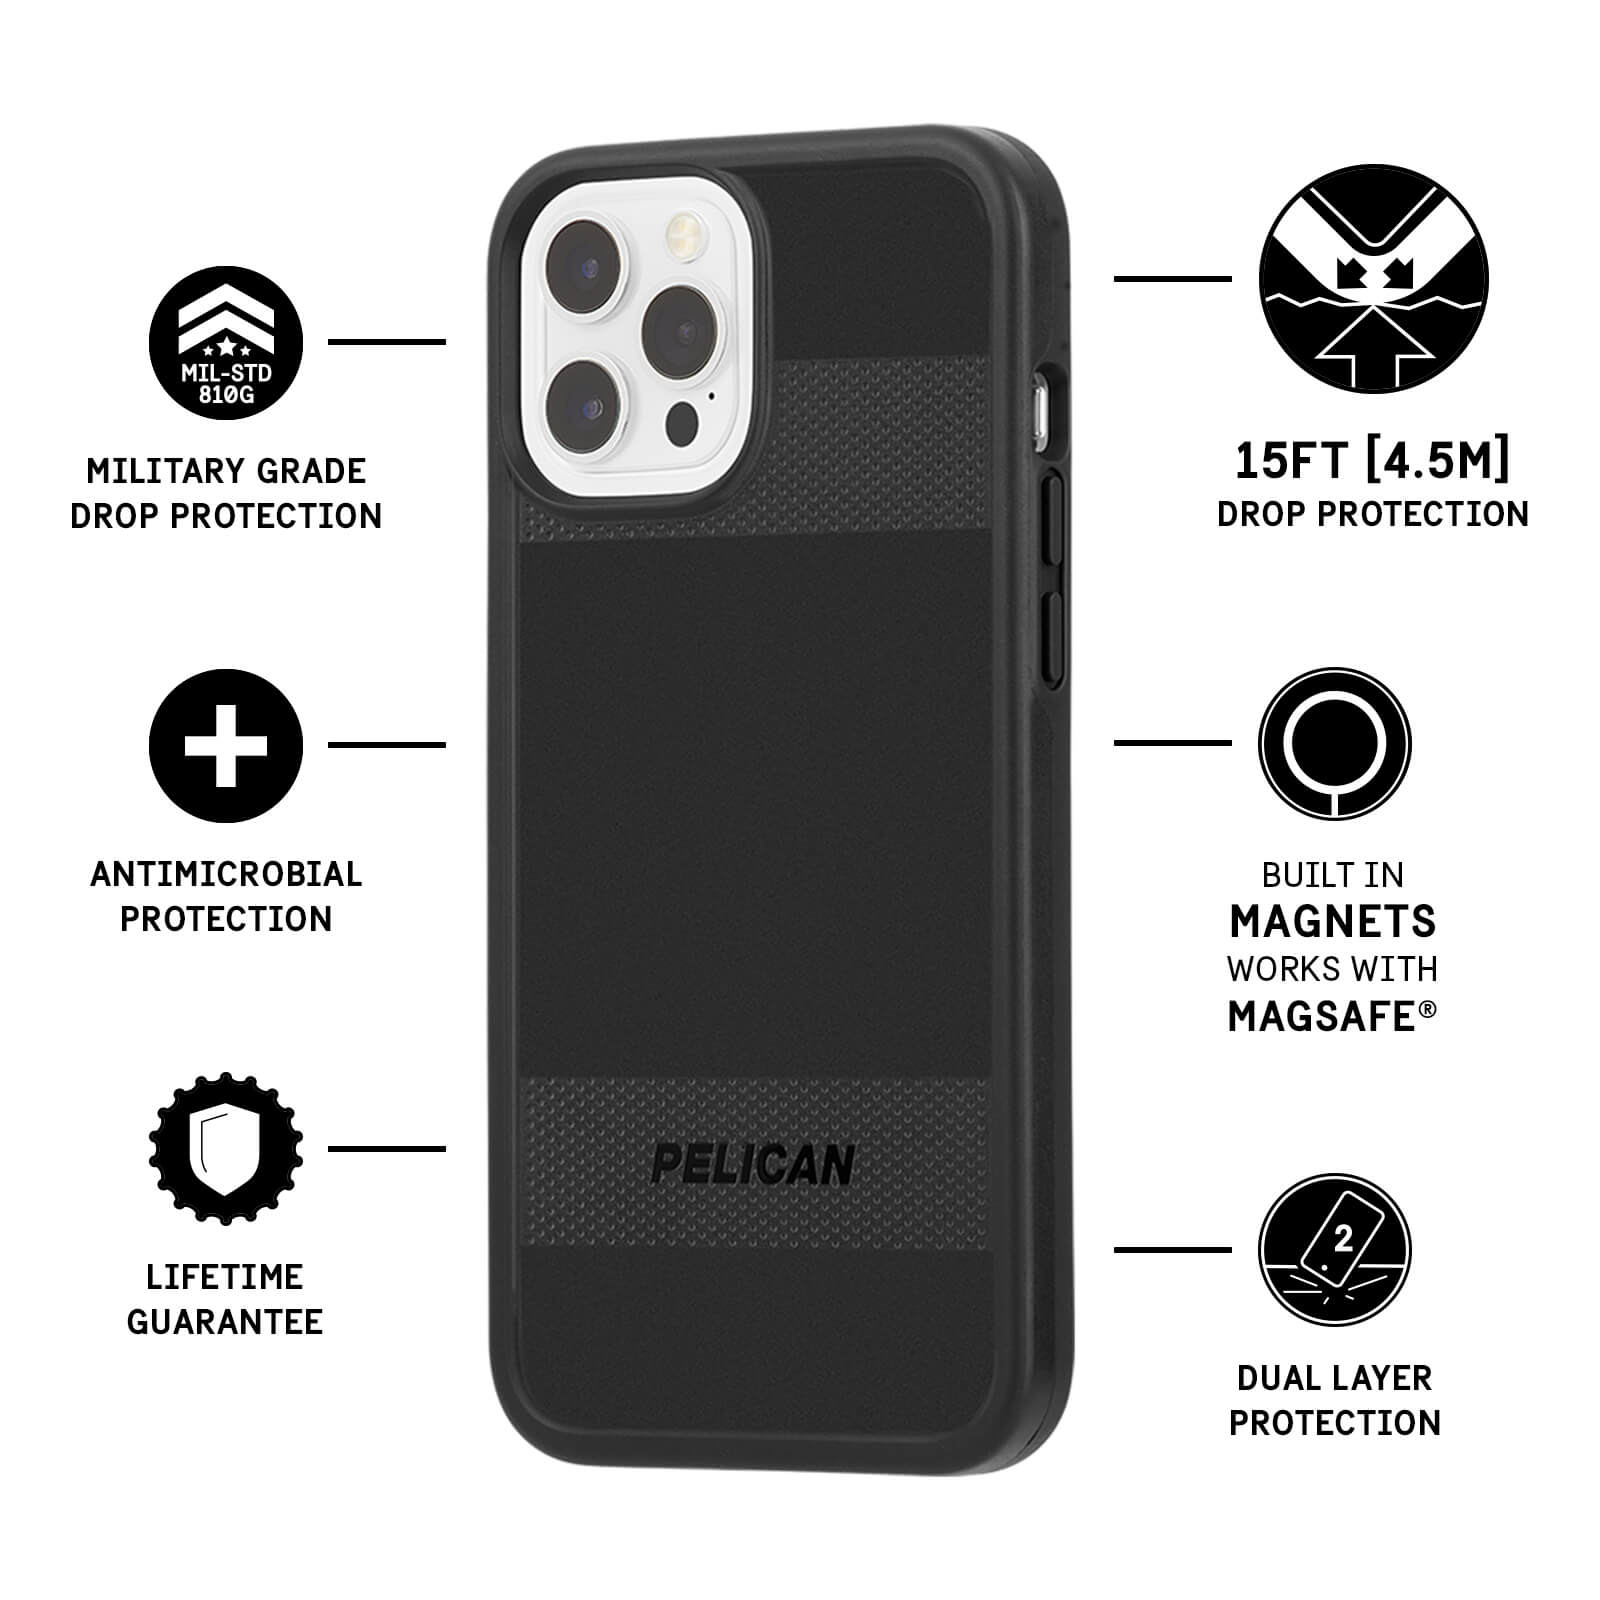 Pelican Protector for iPhone 13 (Works with Magsafe)